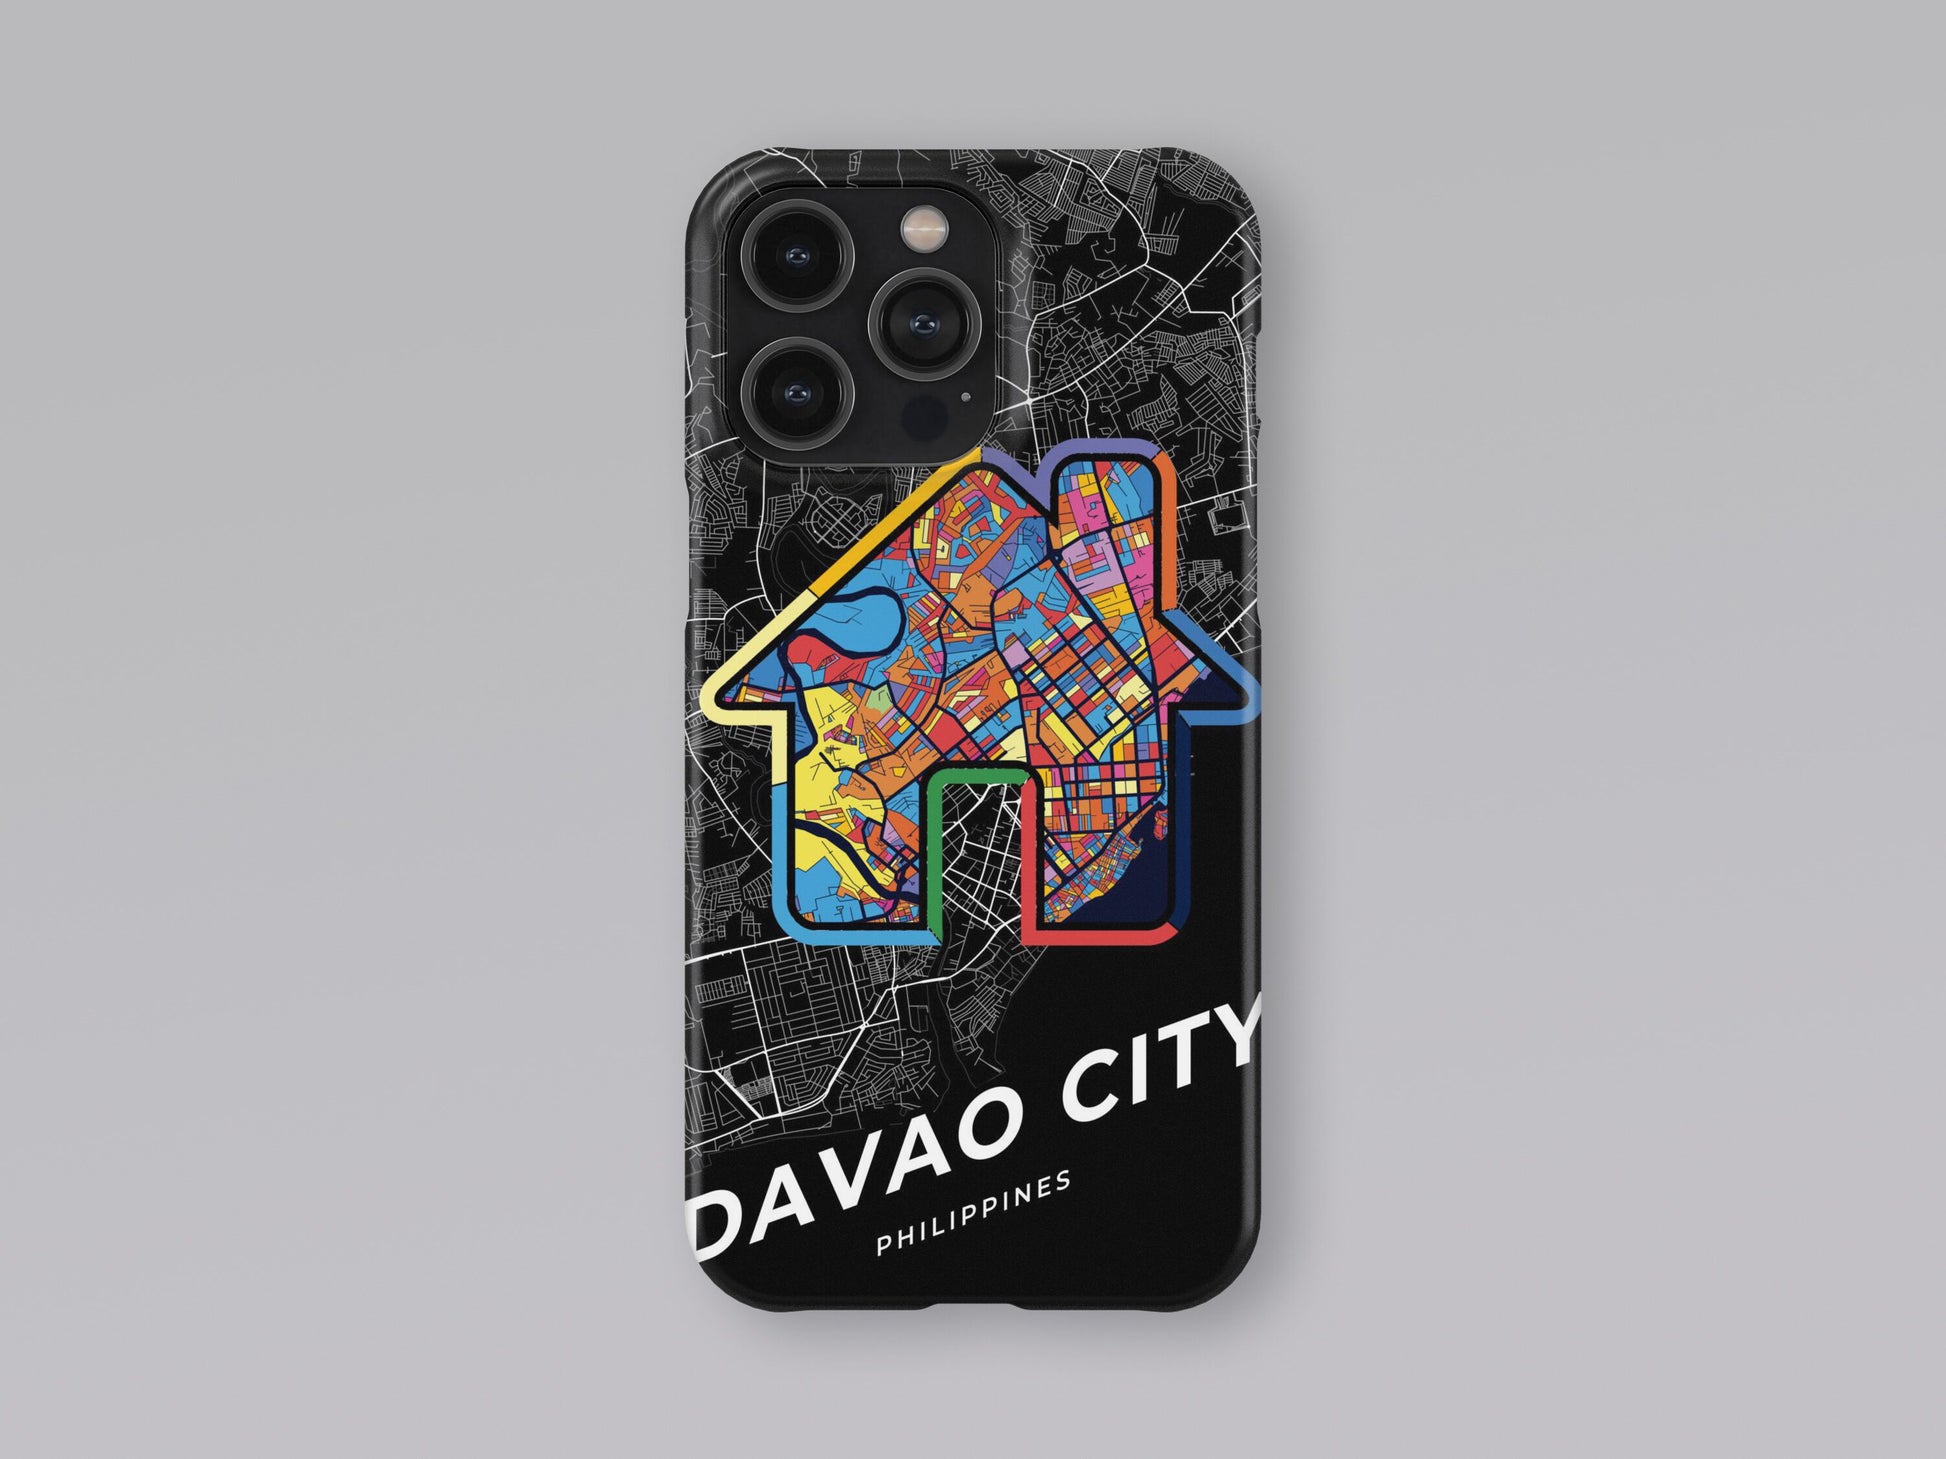 Davao City Philippines slim phone case with colorful icon. Birthday, wedding or housewarming gift. Couple match cases. 3